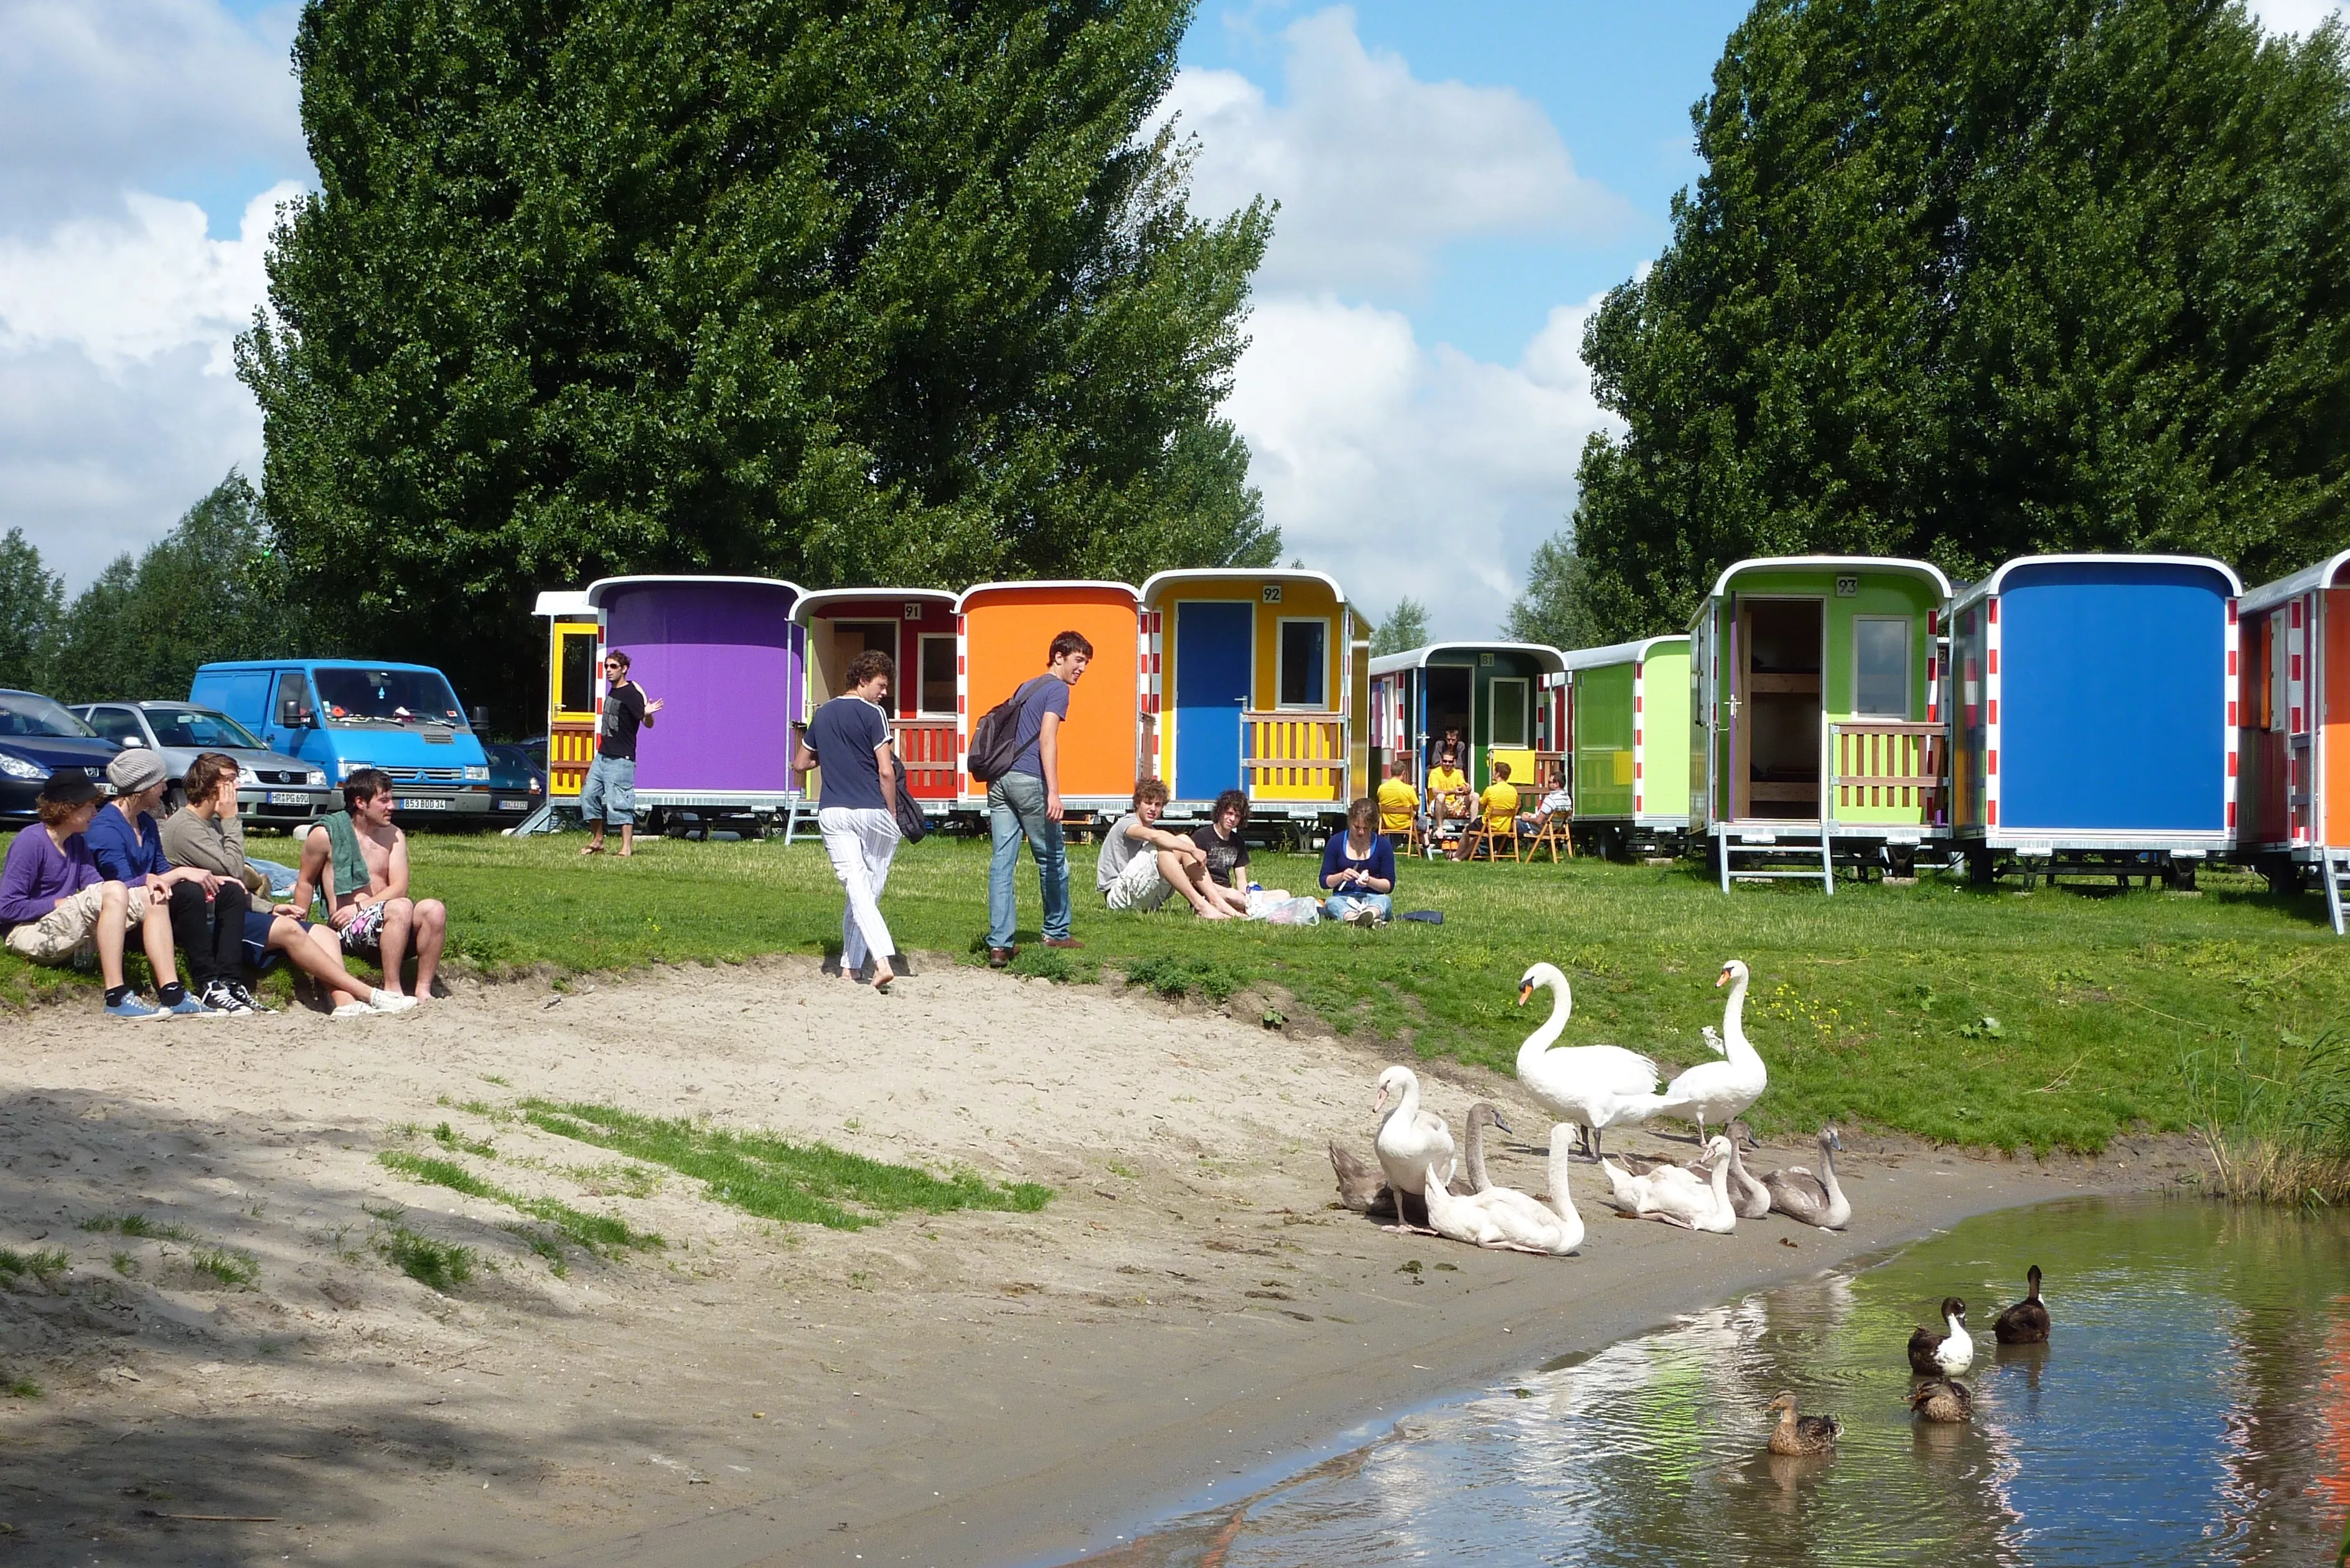 Camping Zeeburg Amsterdam in Netherlands, Europe | Campsites - Rated 8